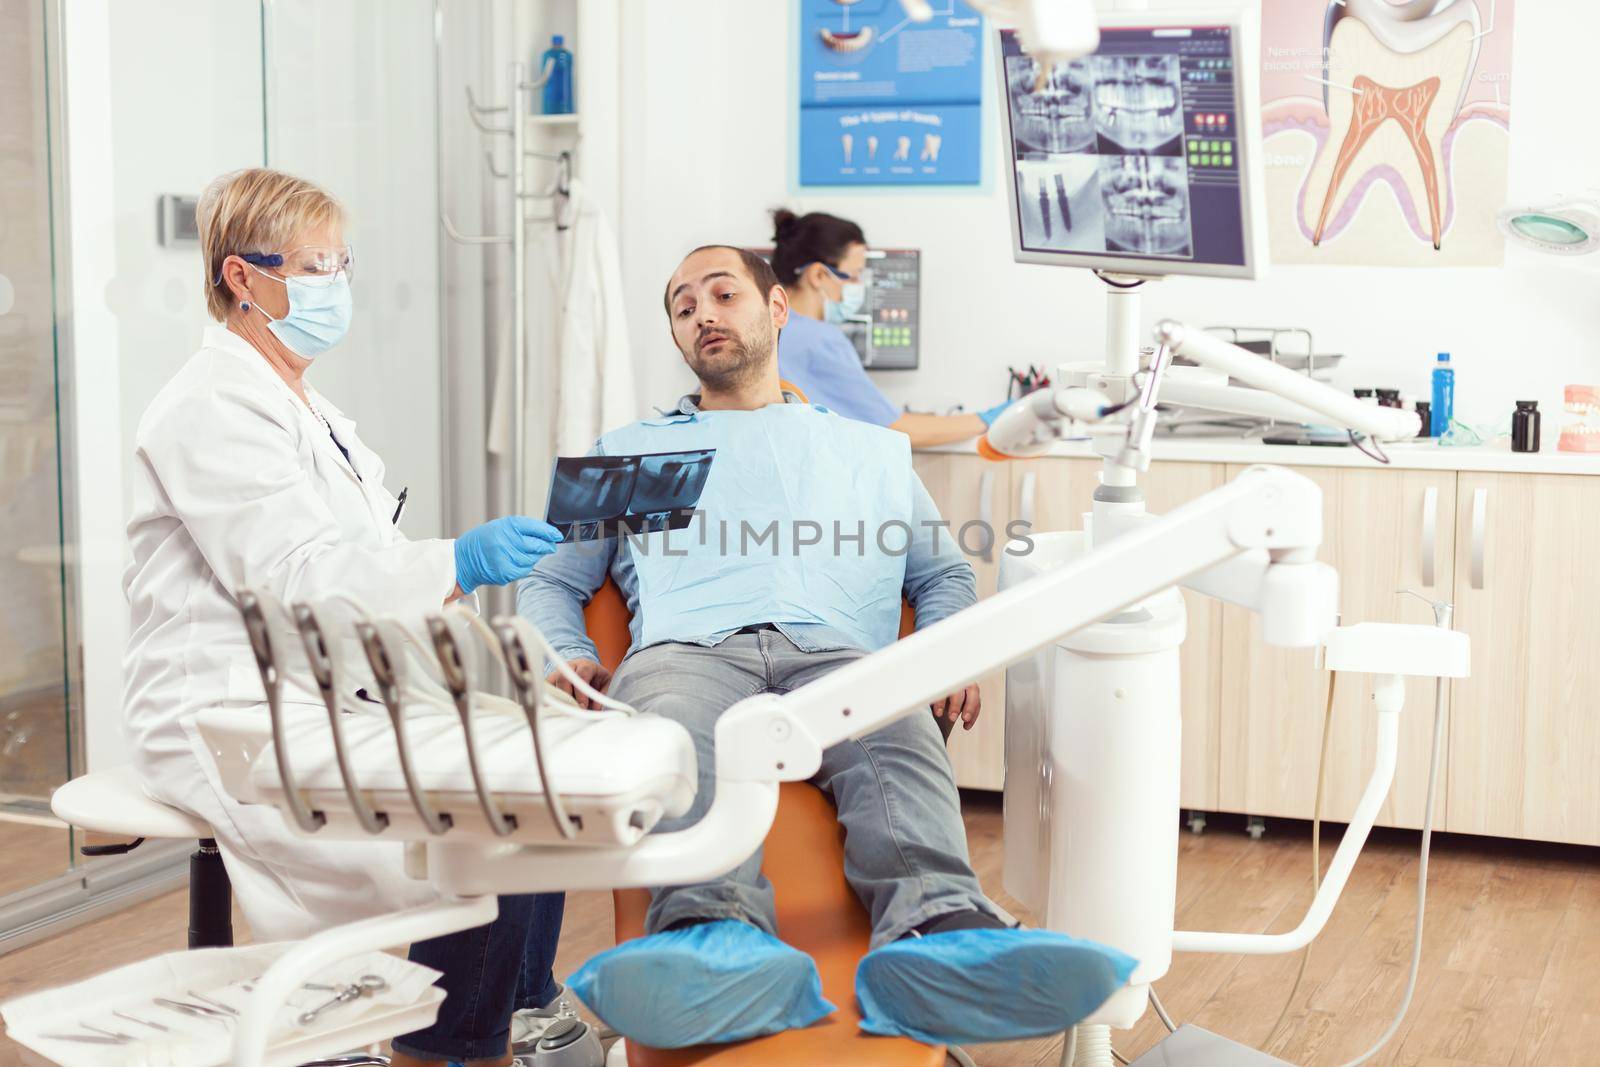 Senior woman dentist treating sick man patient in modern stomatological dentistry office showing teeth radiography explaining dental intervention. In background nurse preparing toothache treatment